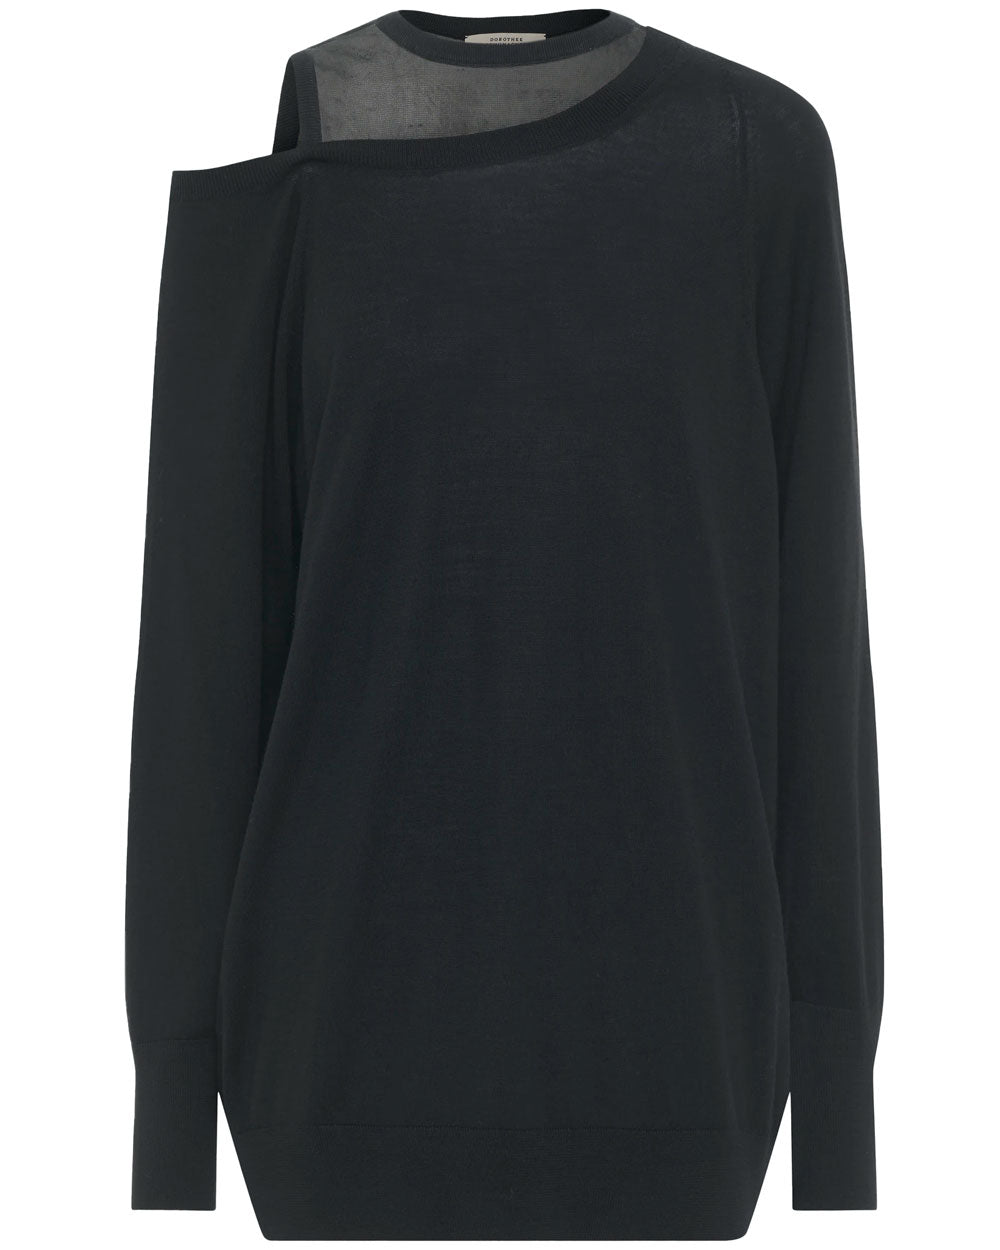 Pure Black Soft Touch Round Neck Pullover